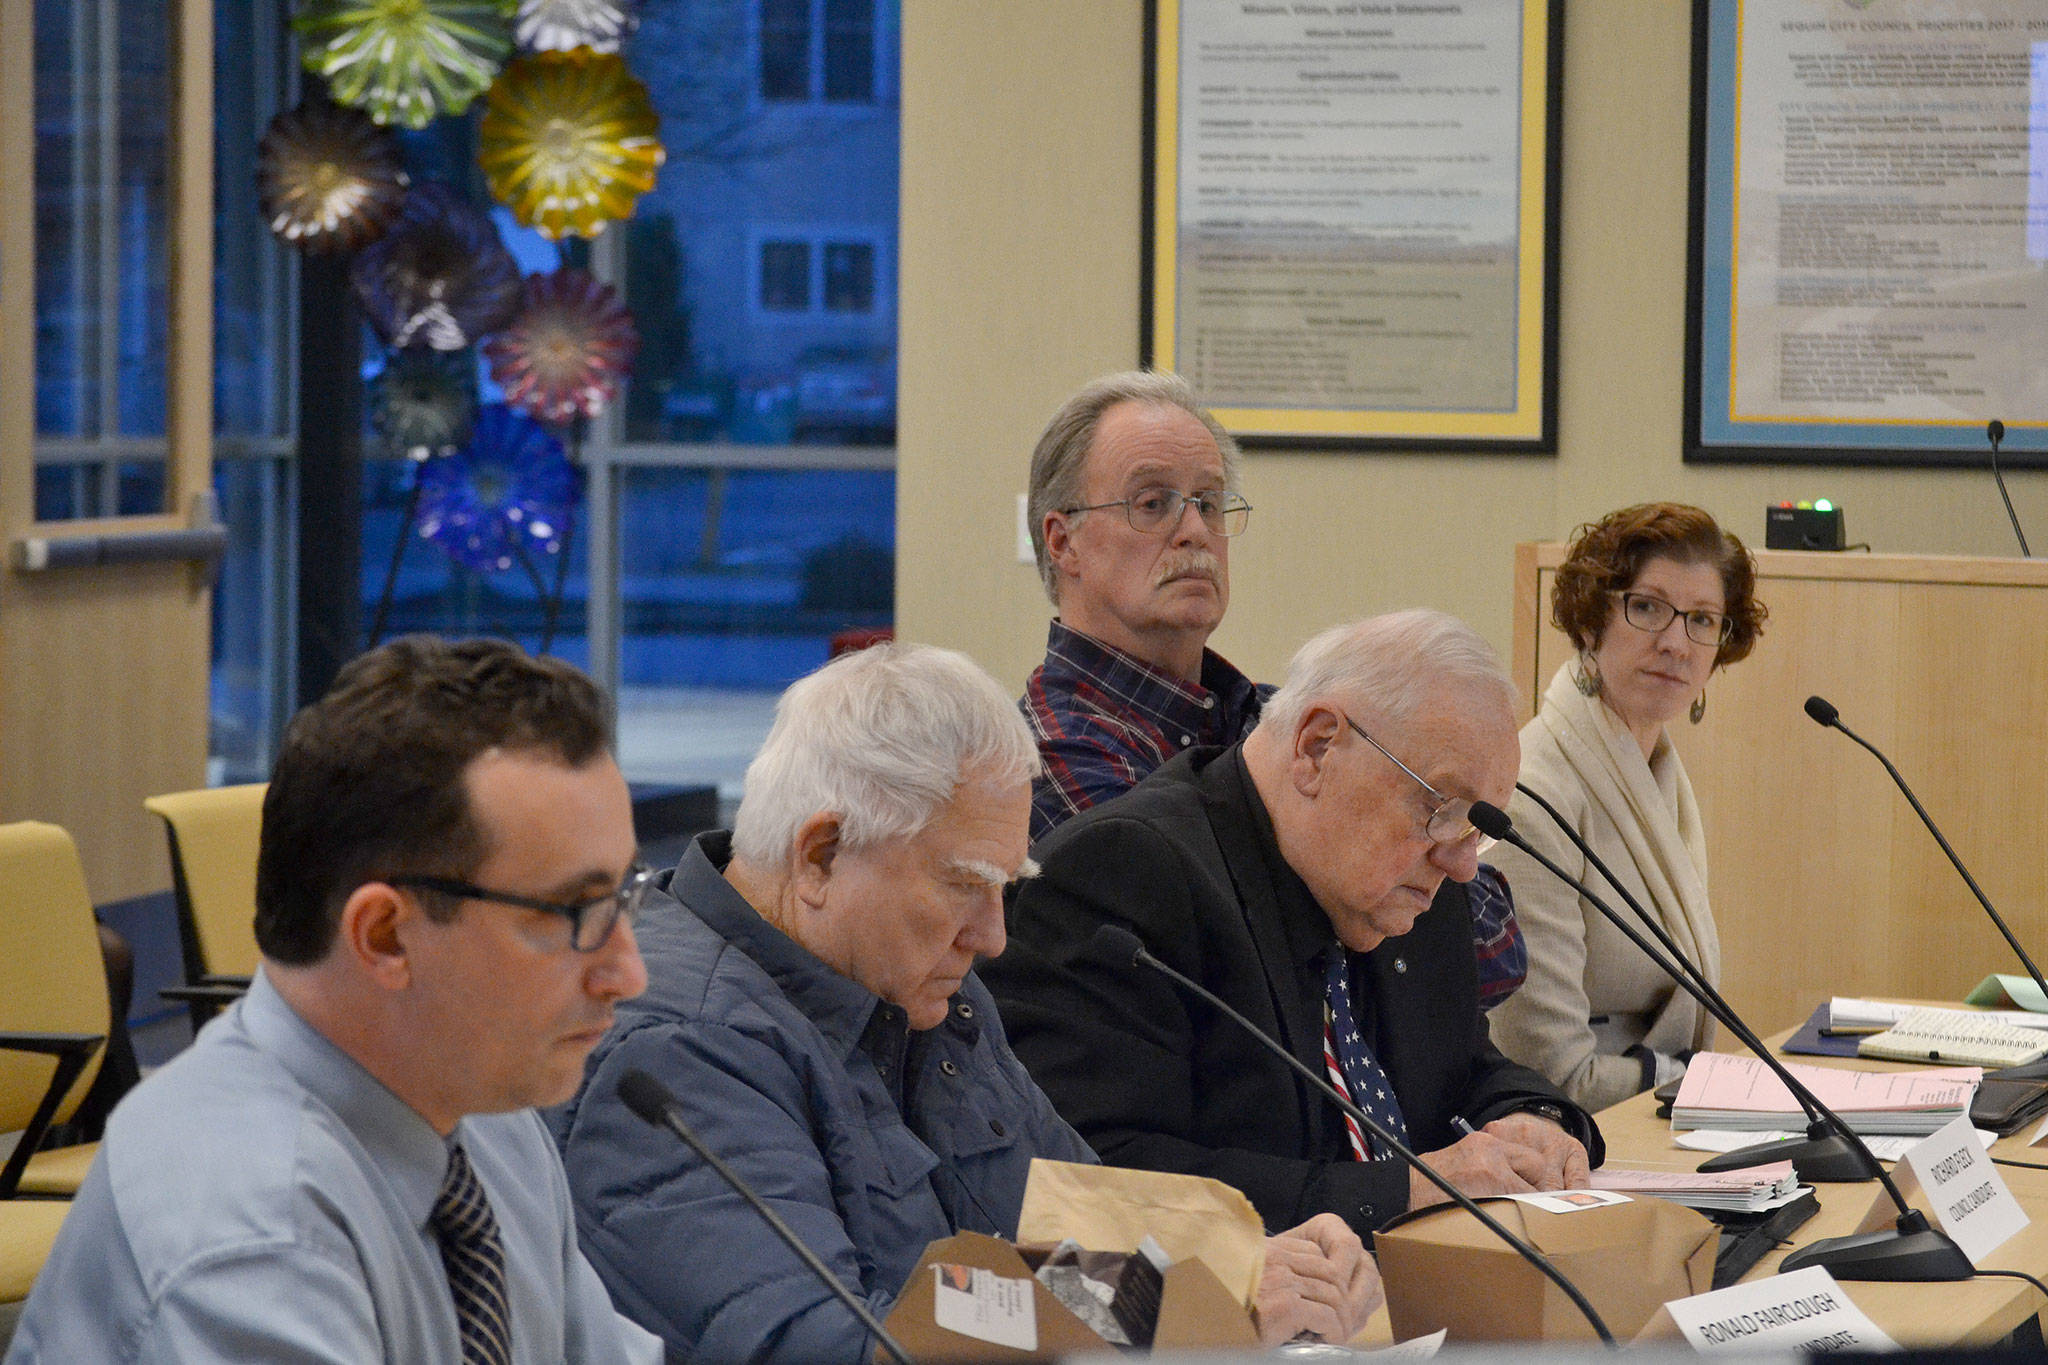 Candidates, sitting from left, David Eaton, Ron Fairclough, Richard Fleck, Bernard “Buddy” Fleck, and Jennifer States field questions during the application process Monday for the vacant Sequim City Council position. (Matthew Nash/Olympic Peninsula News Group)